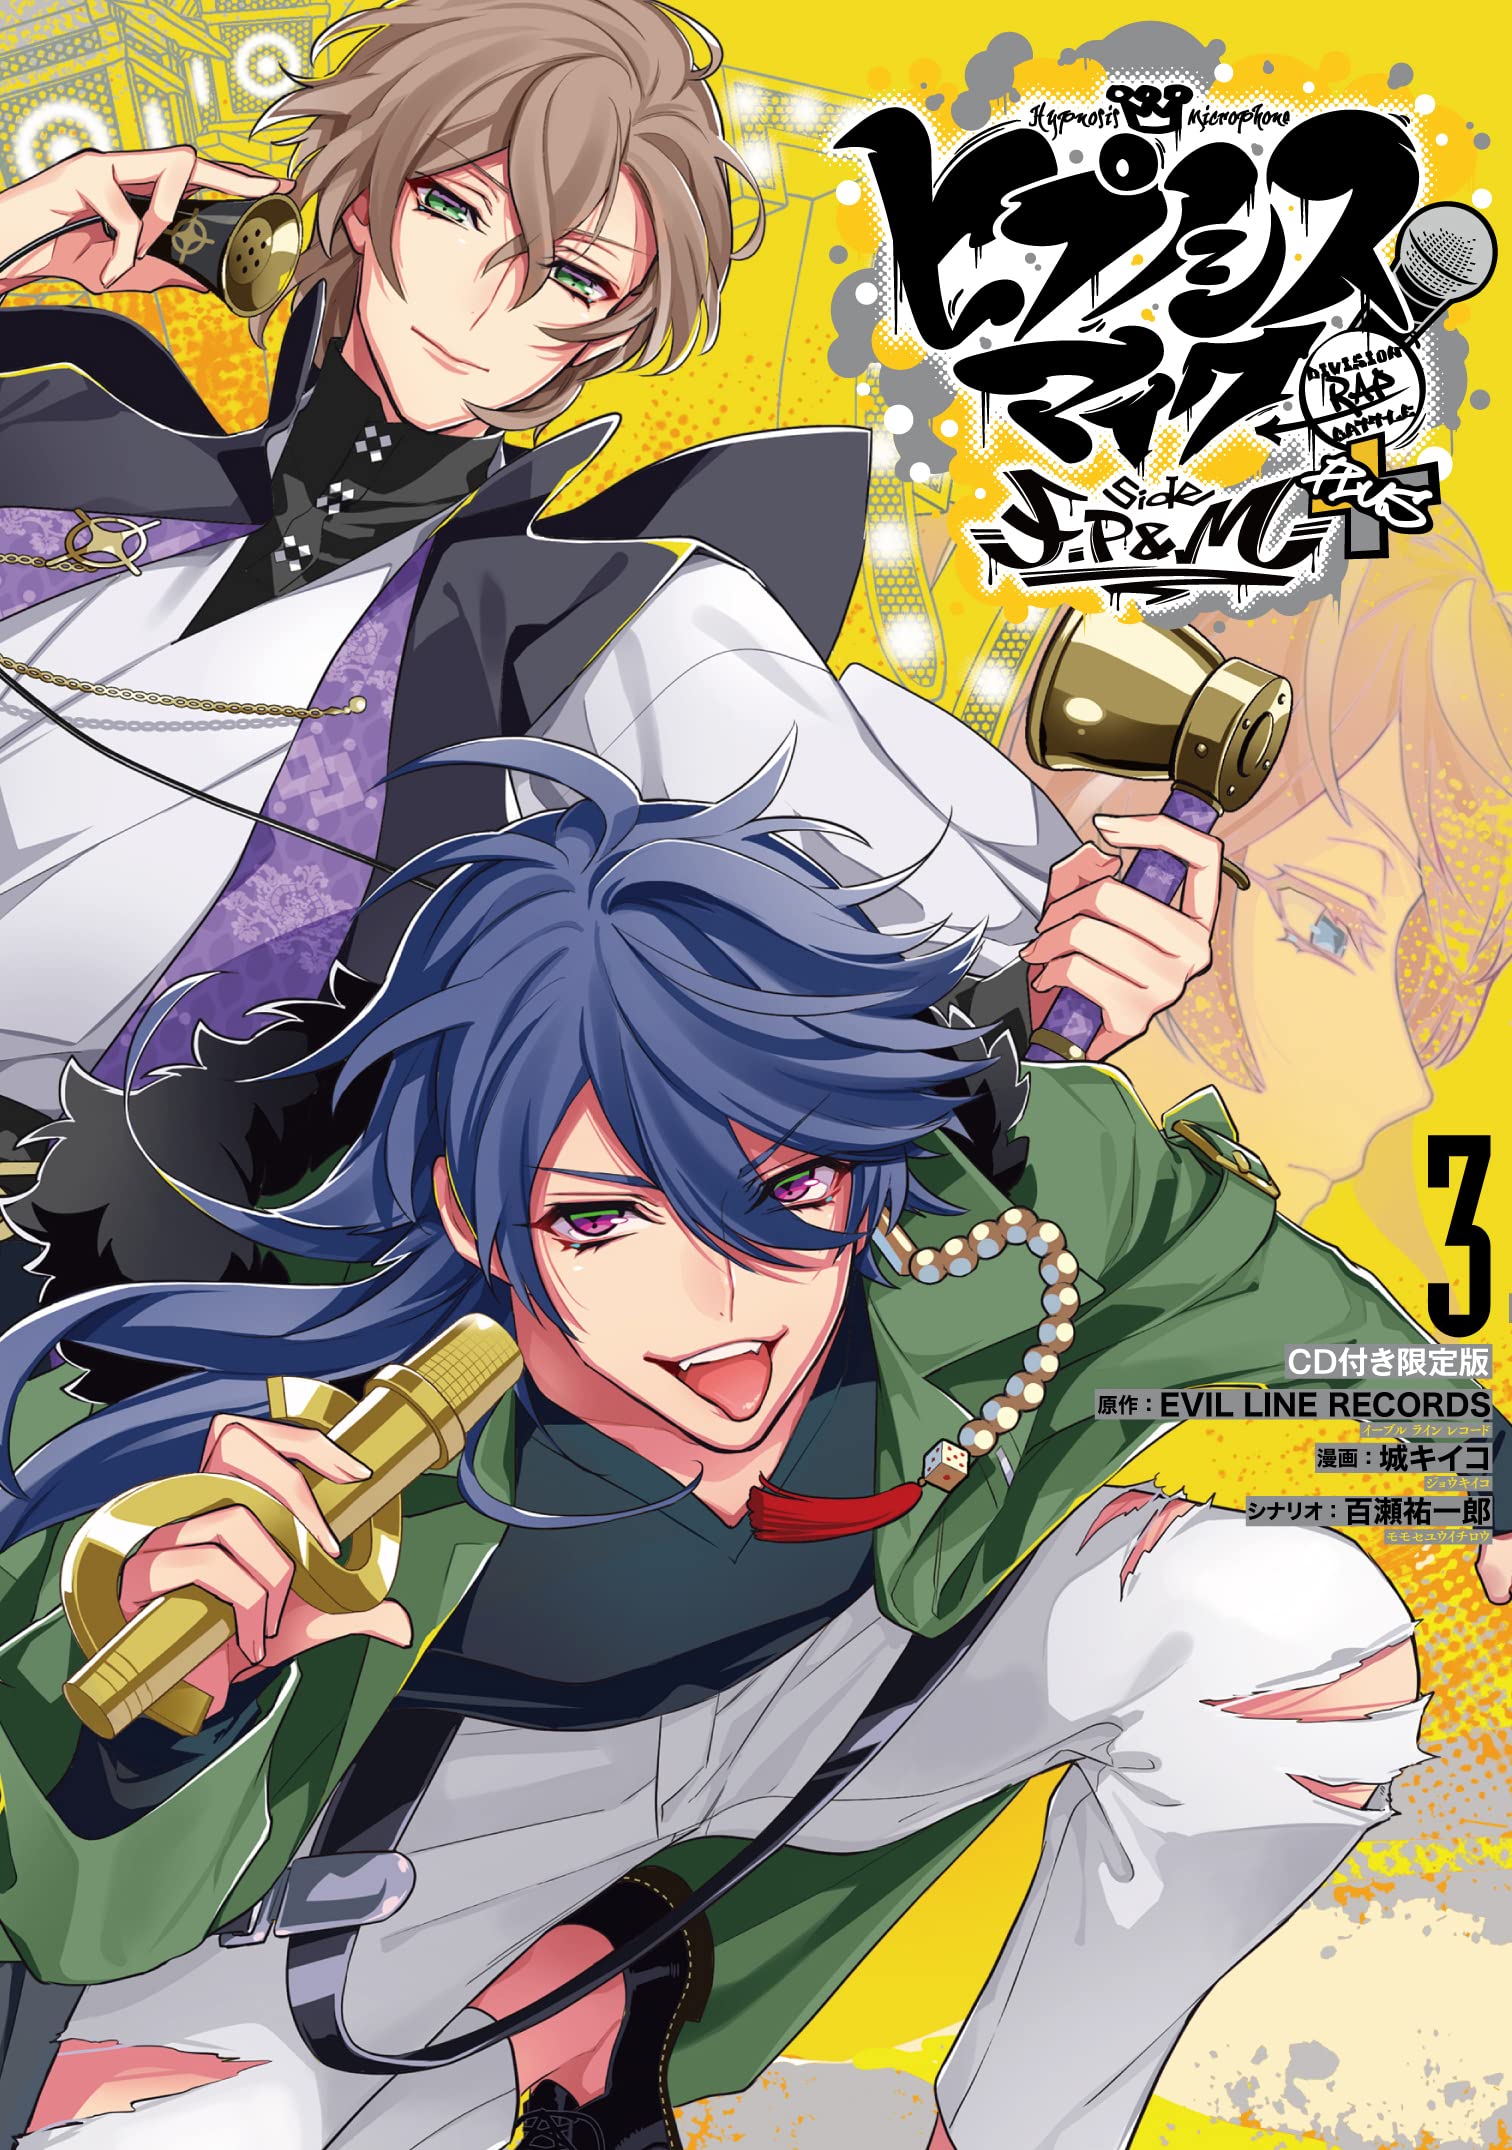 Hypnosis Mic - Division Rap Battle - side F.P & M+ 3 Limited 